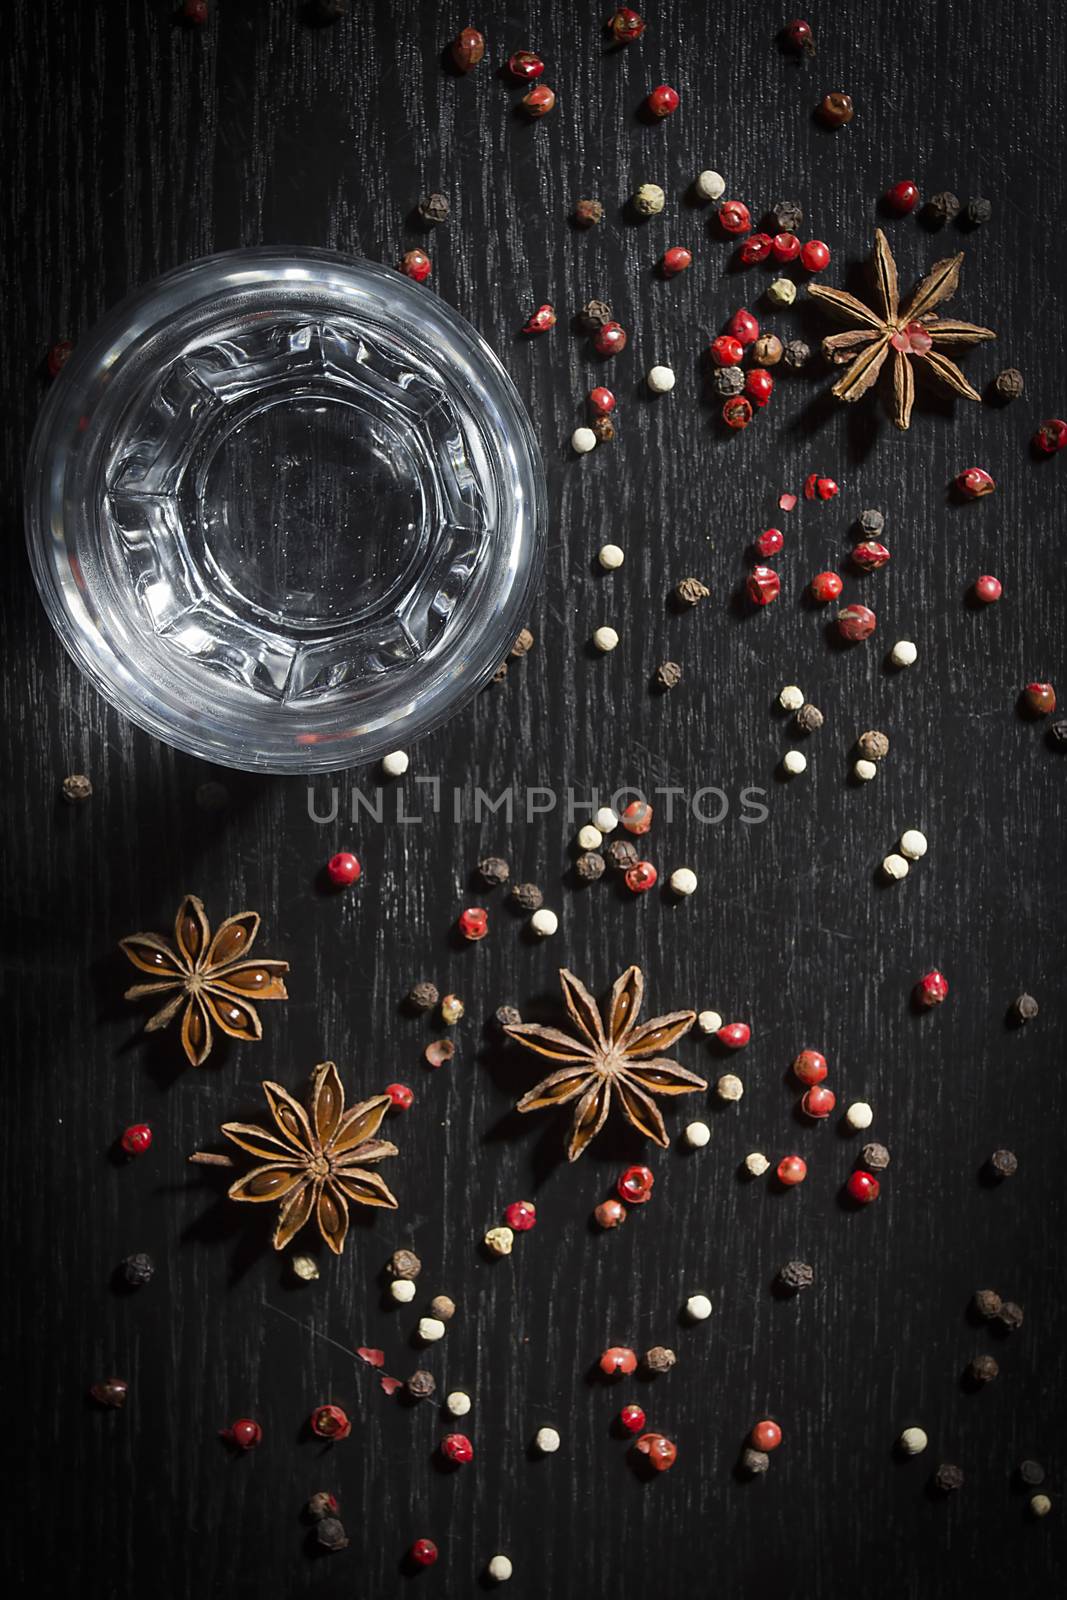 Anise vodka in a glass on a wooden surface